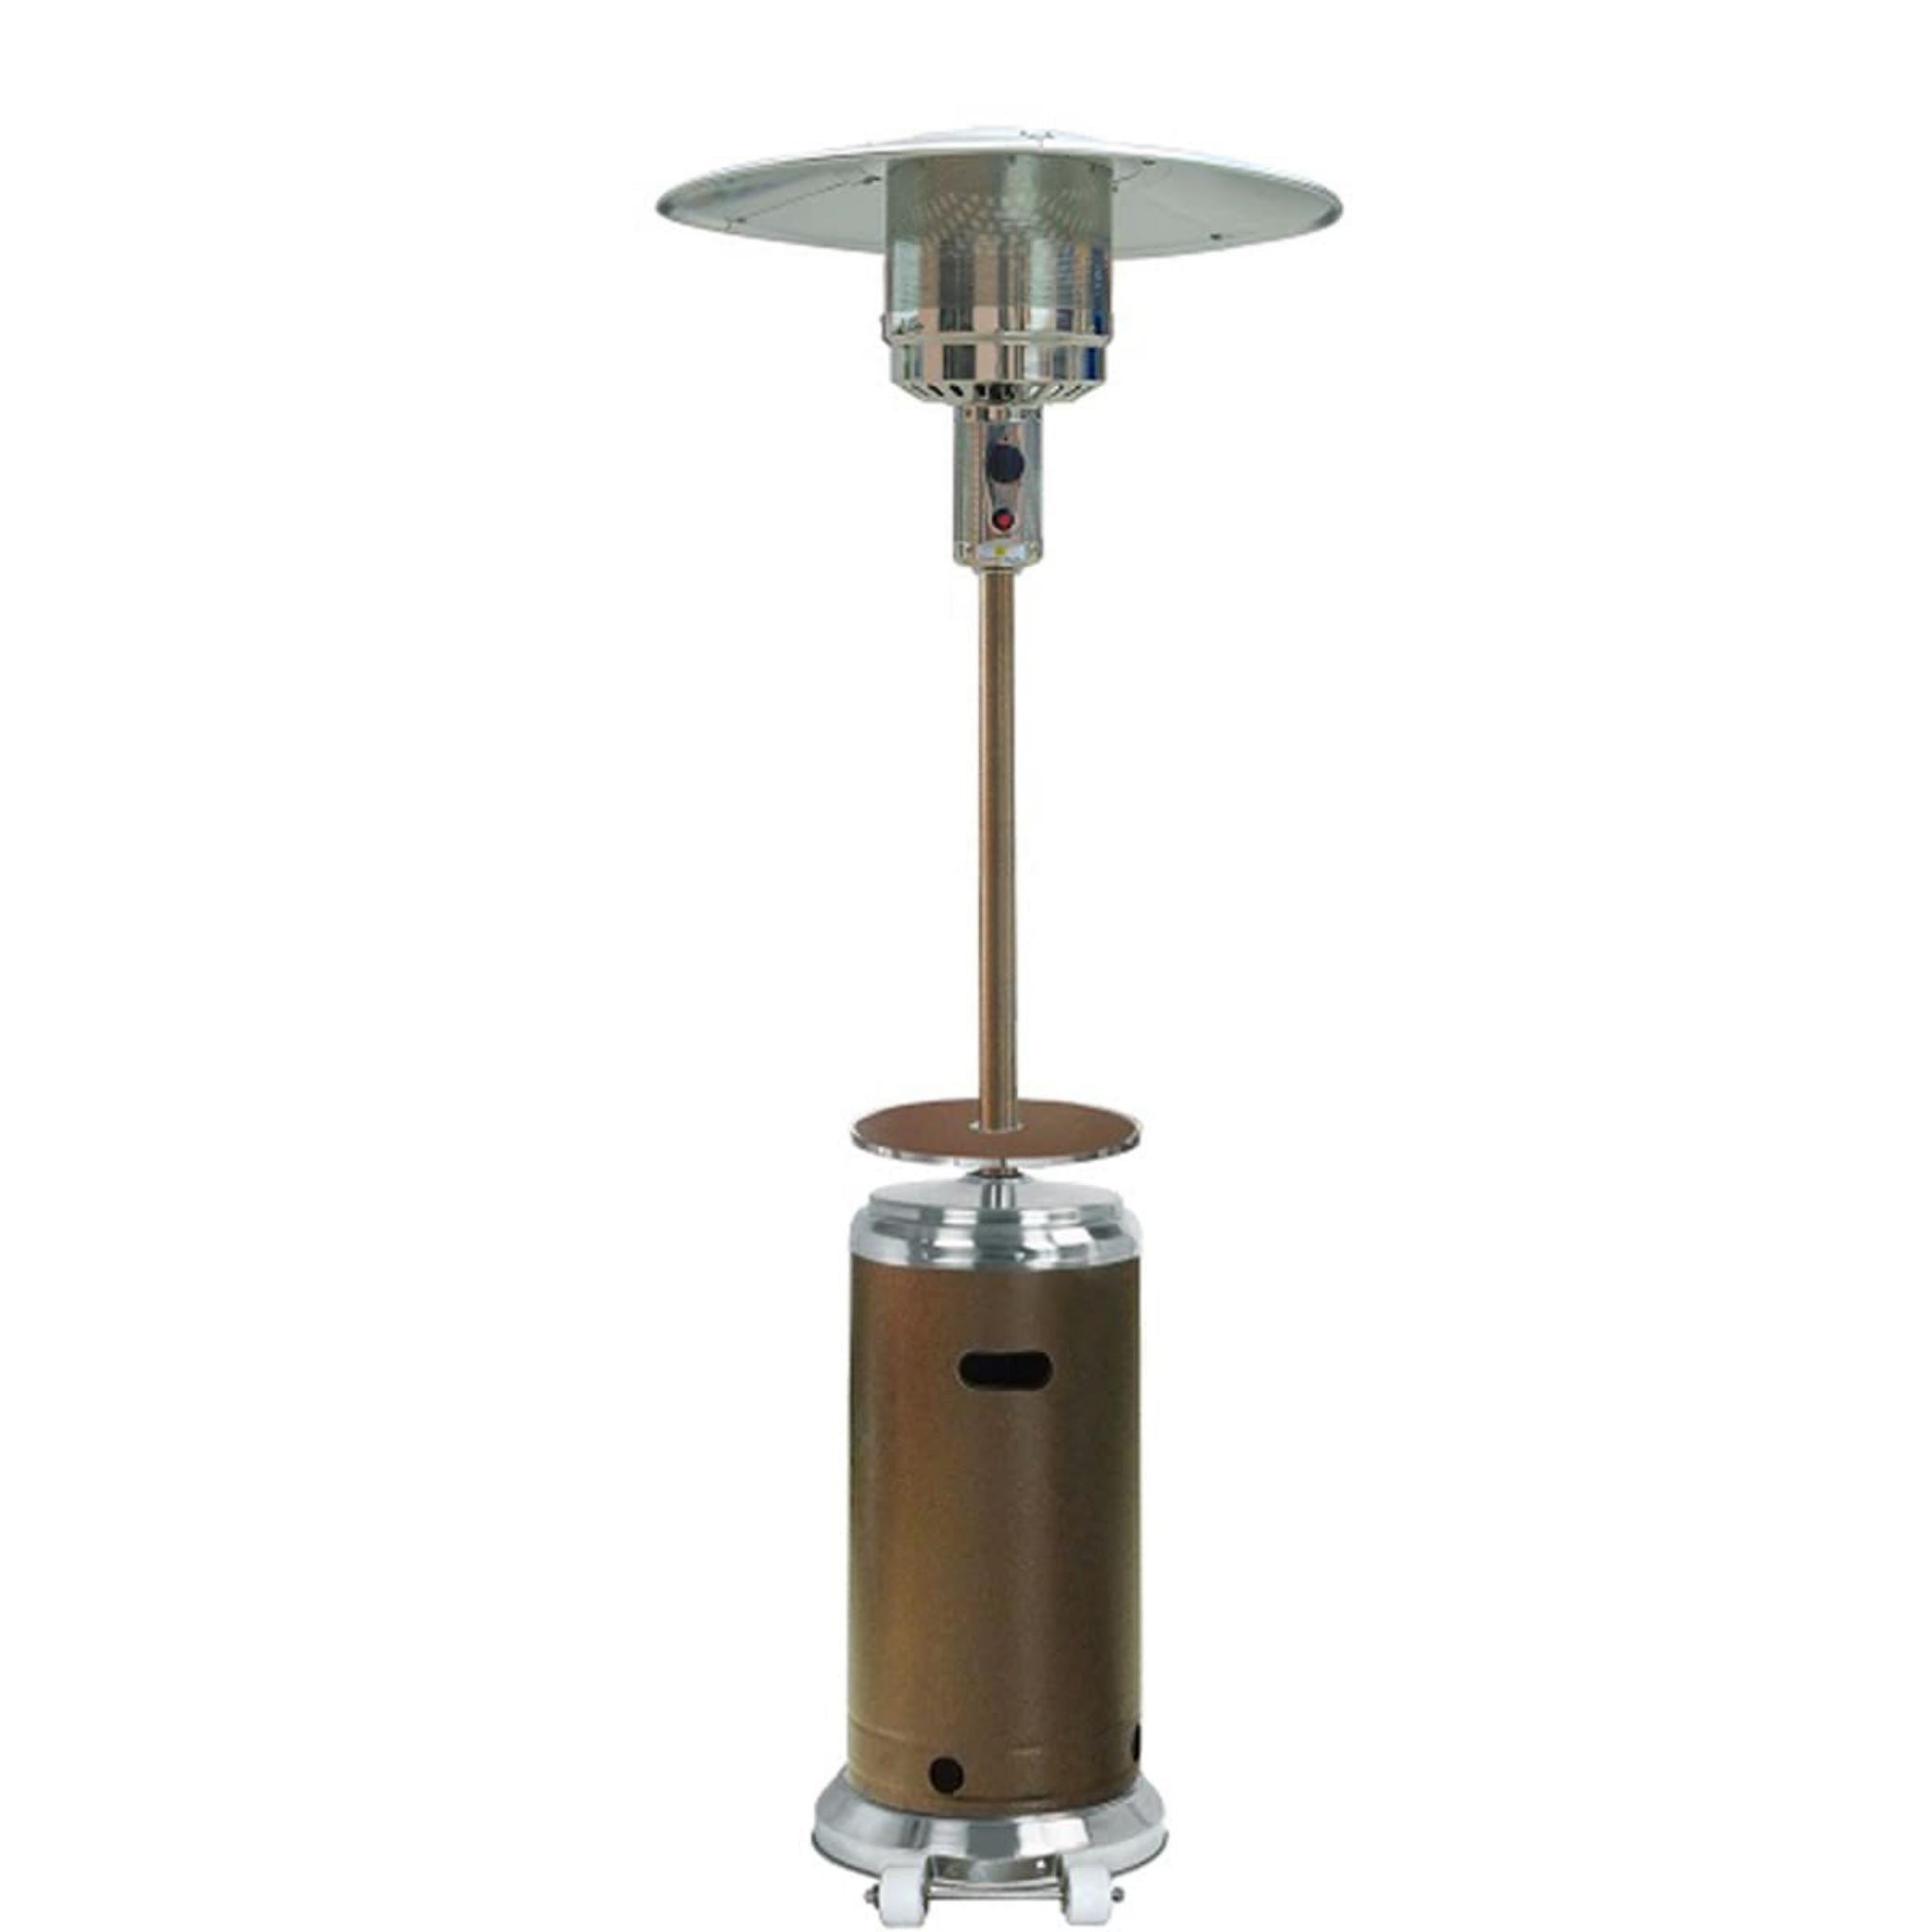 AZ Patio Heater 87" Two Tone Outdoor Patio Heater with Table- Hammered Bronze & Stainless Steel Patio Heater AZ Patio Heaters  in white background